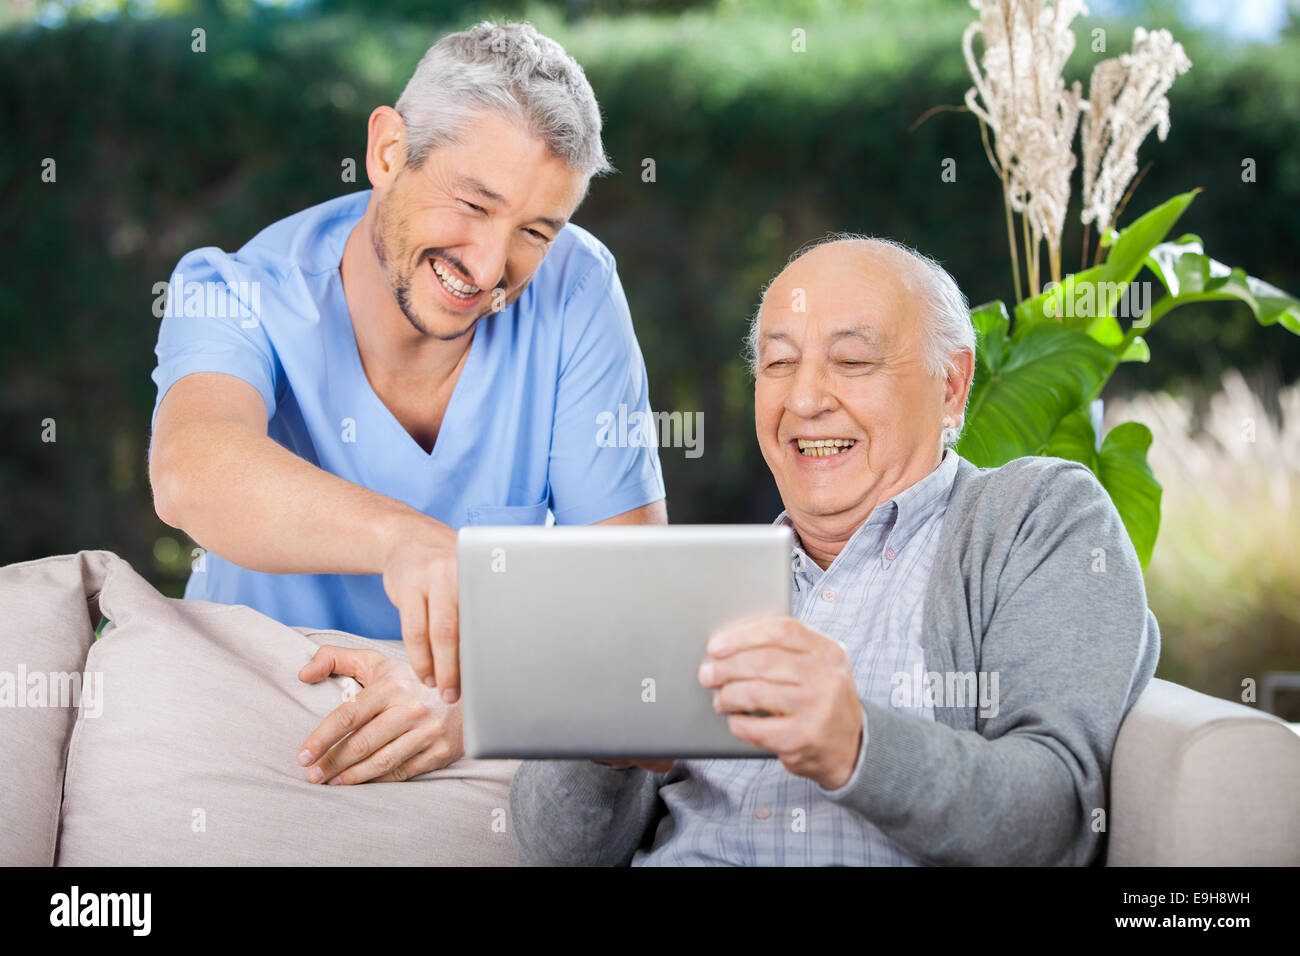 Male Nurse And Senior Man Laughing While Using Digital Tablet Stock Photo